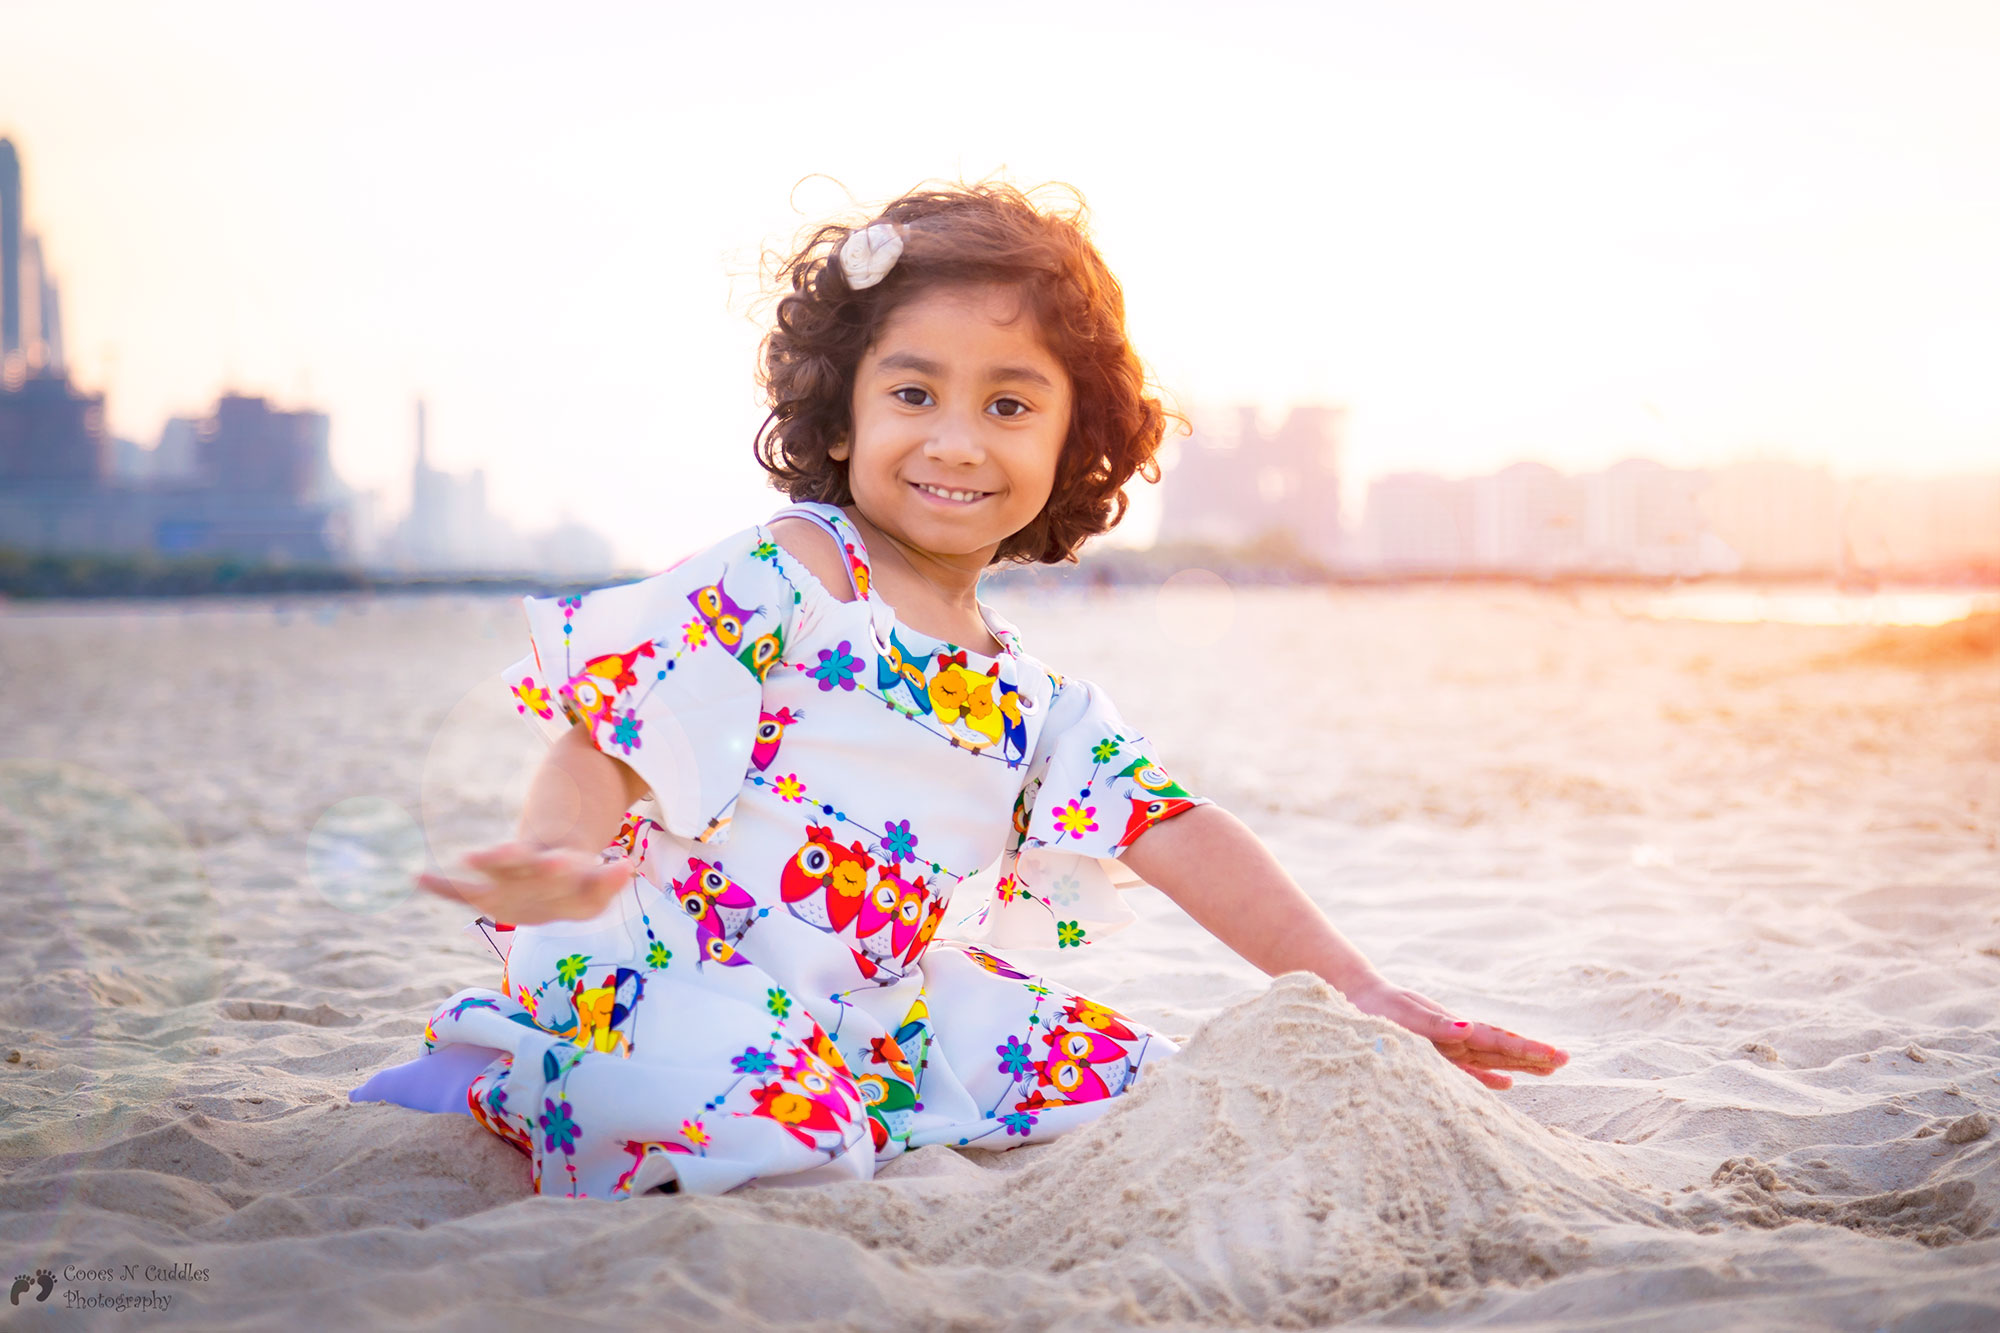 10-tips-for-photographing-children|Child Photography|Cooes-N-Cuddles-Photography| DubaiFamilyPhotographer FamilyPortraits